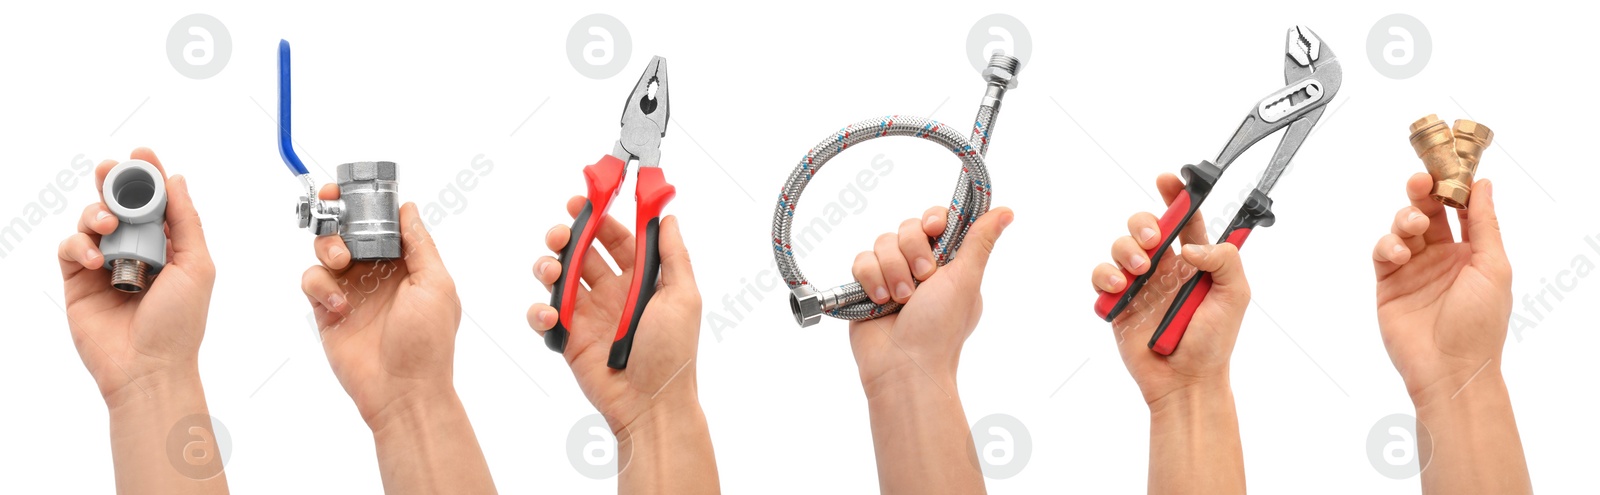 Image of Collage with photos of men holding different plumbing tools on white background. Banner design